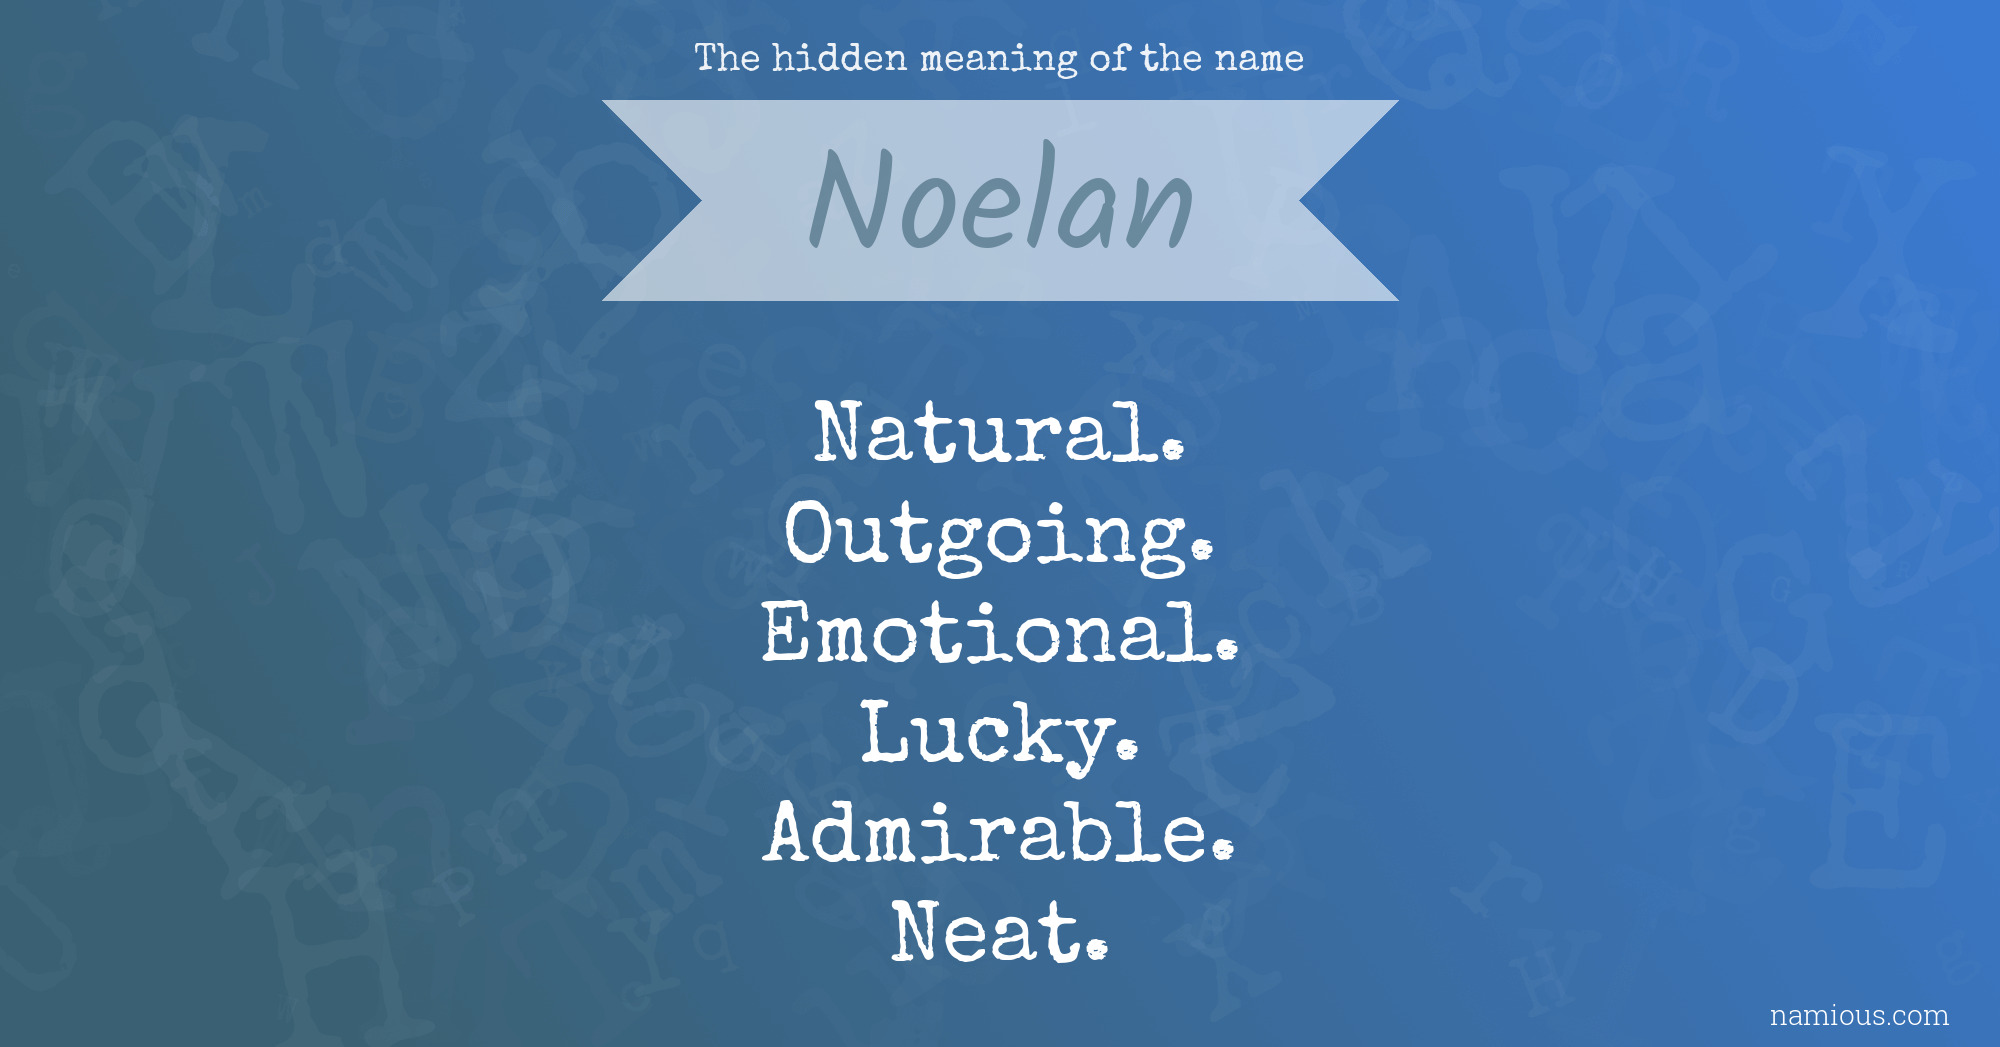 The hidden meaning of the name Noelan